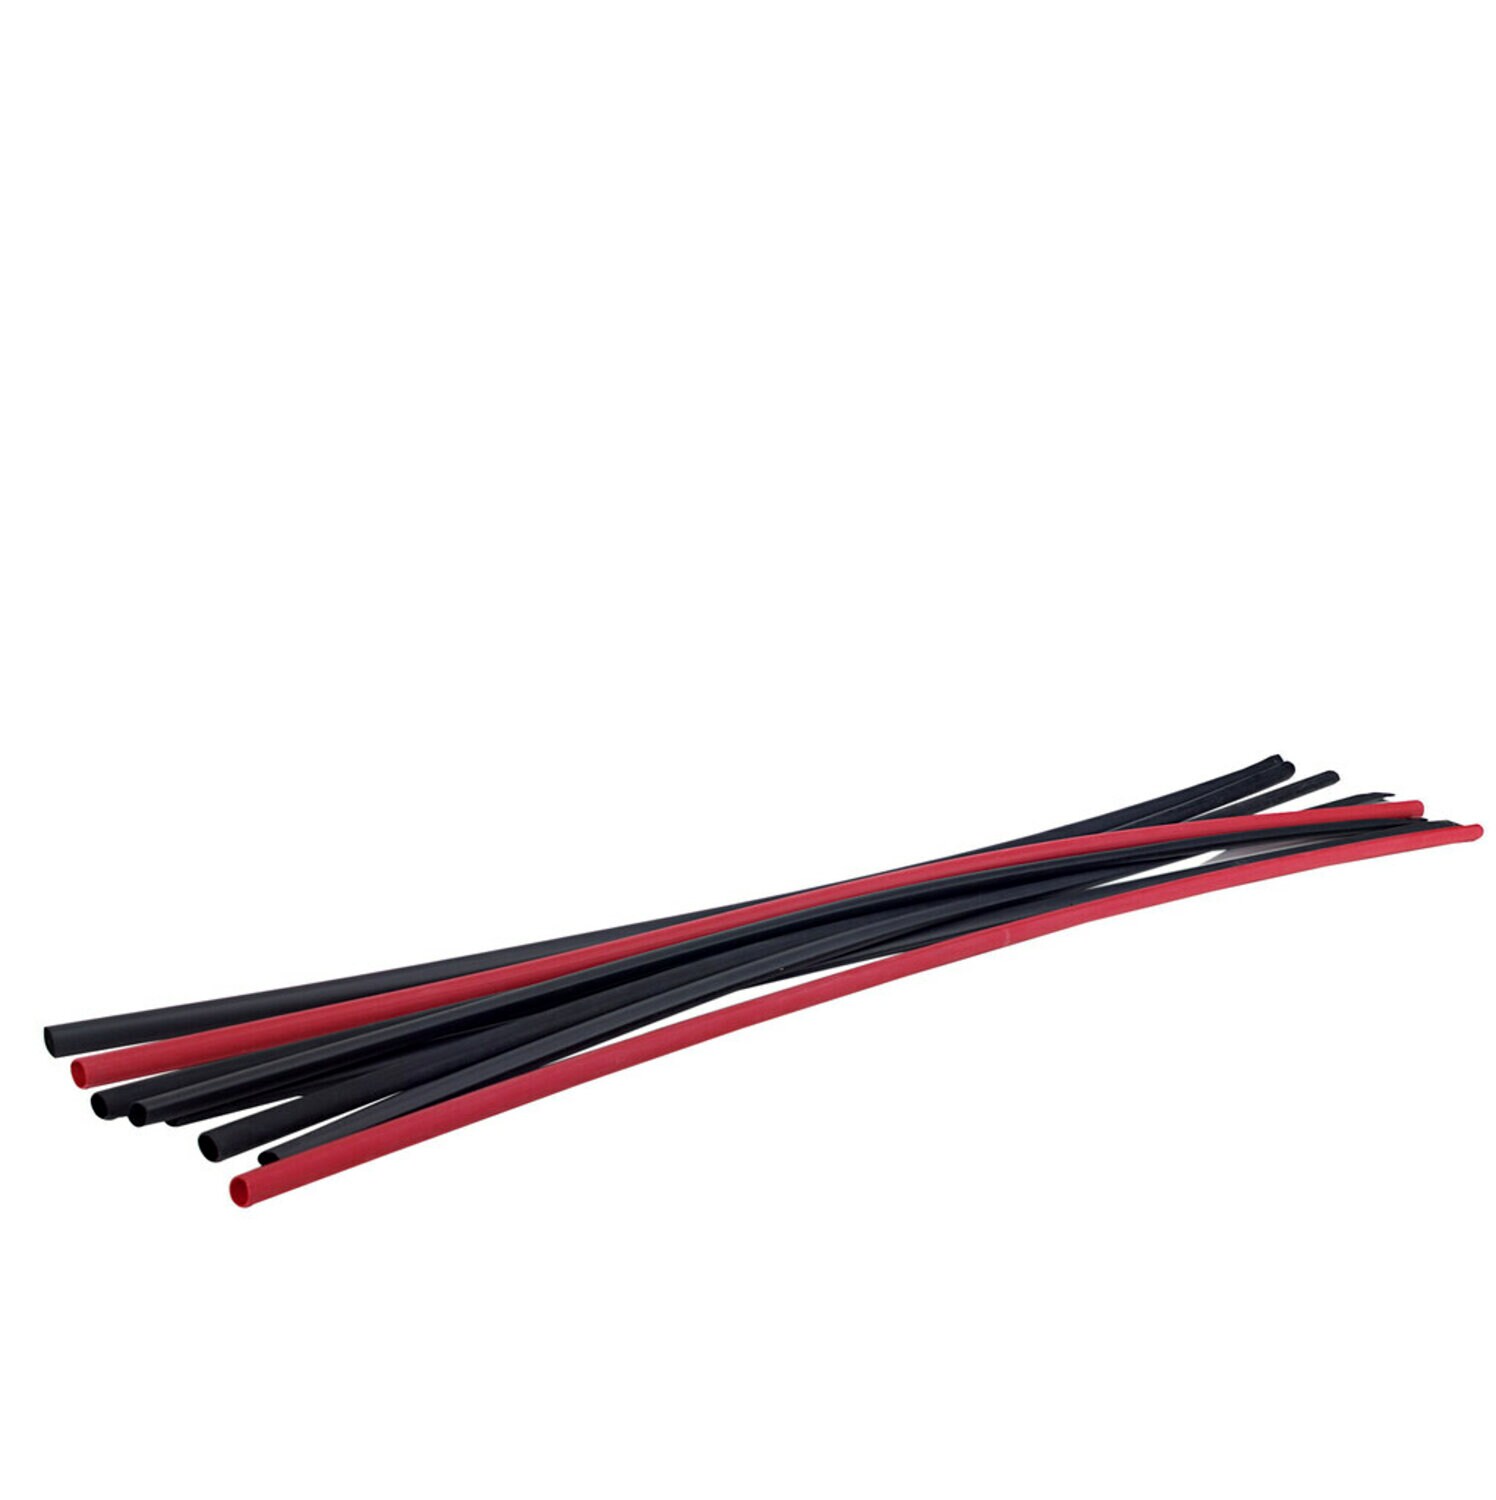 7010304226 - 3M Heat Shrink Thin-Wall Tubing FP-301-3/16-48"-Red-Hdr-25 Pcs, 48 in
Length sticks with header label, 25 pieces/case